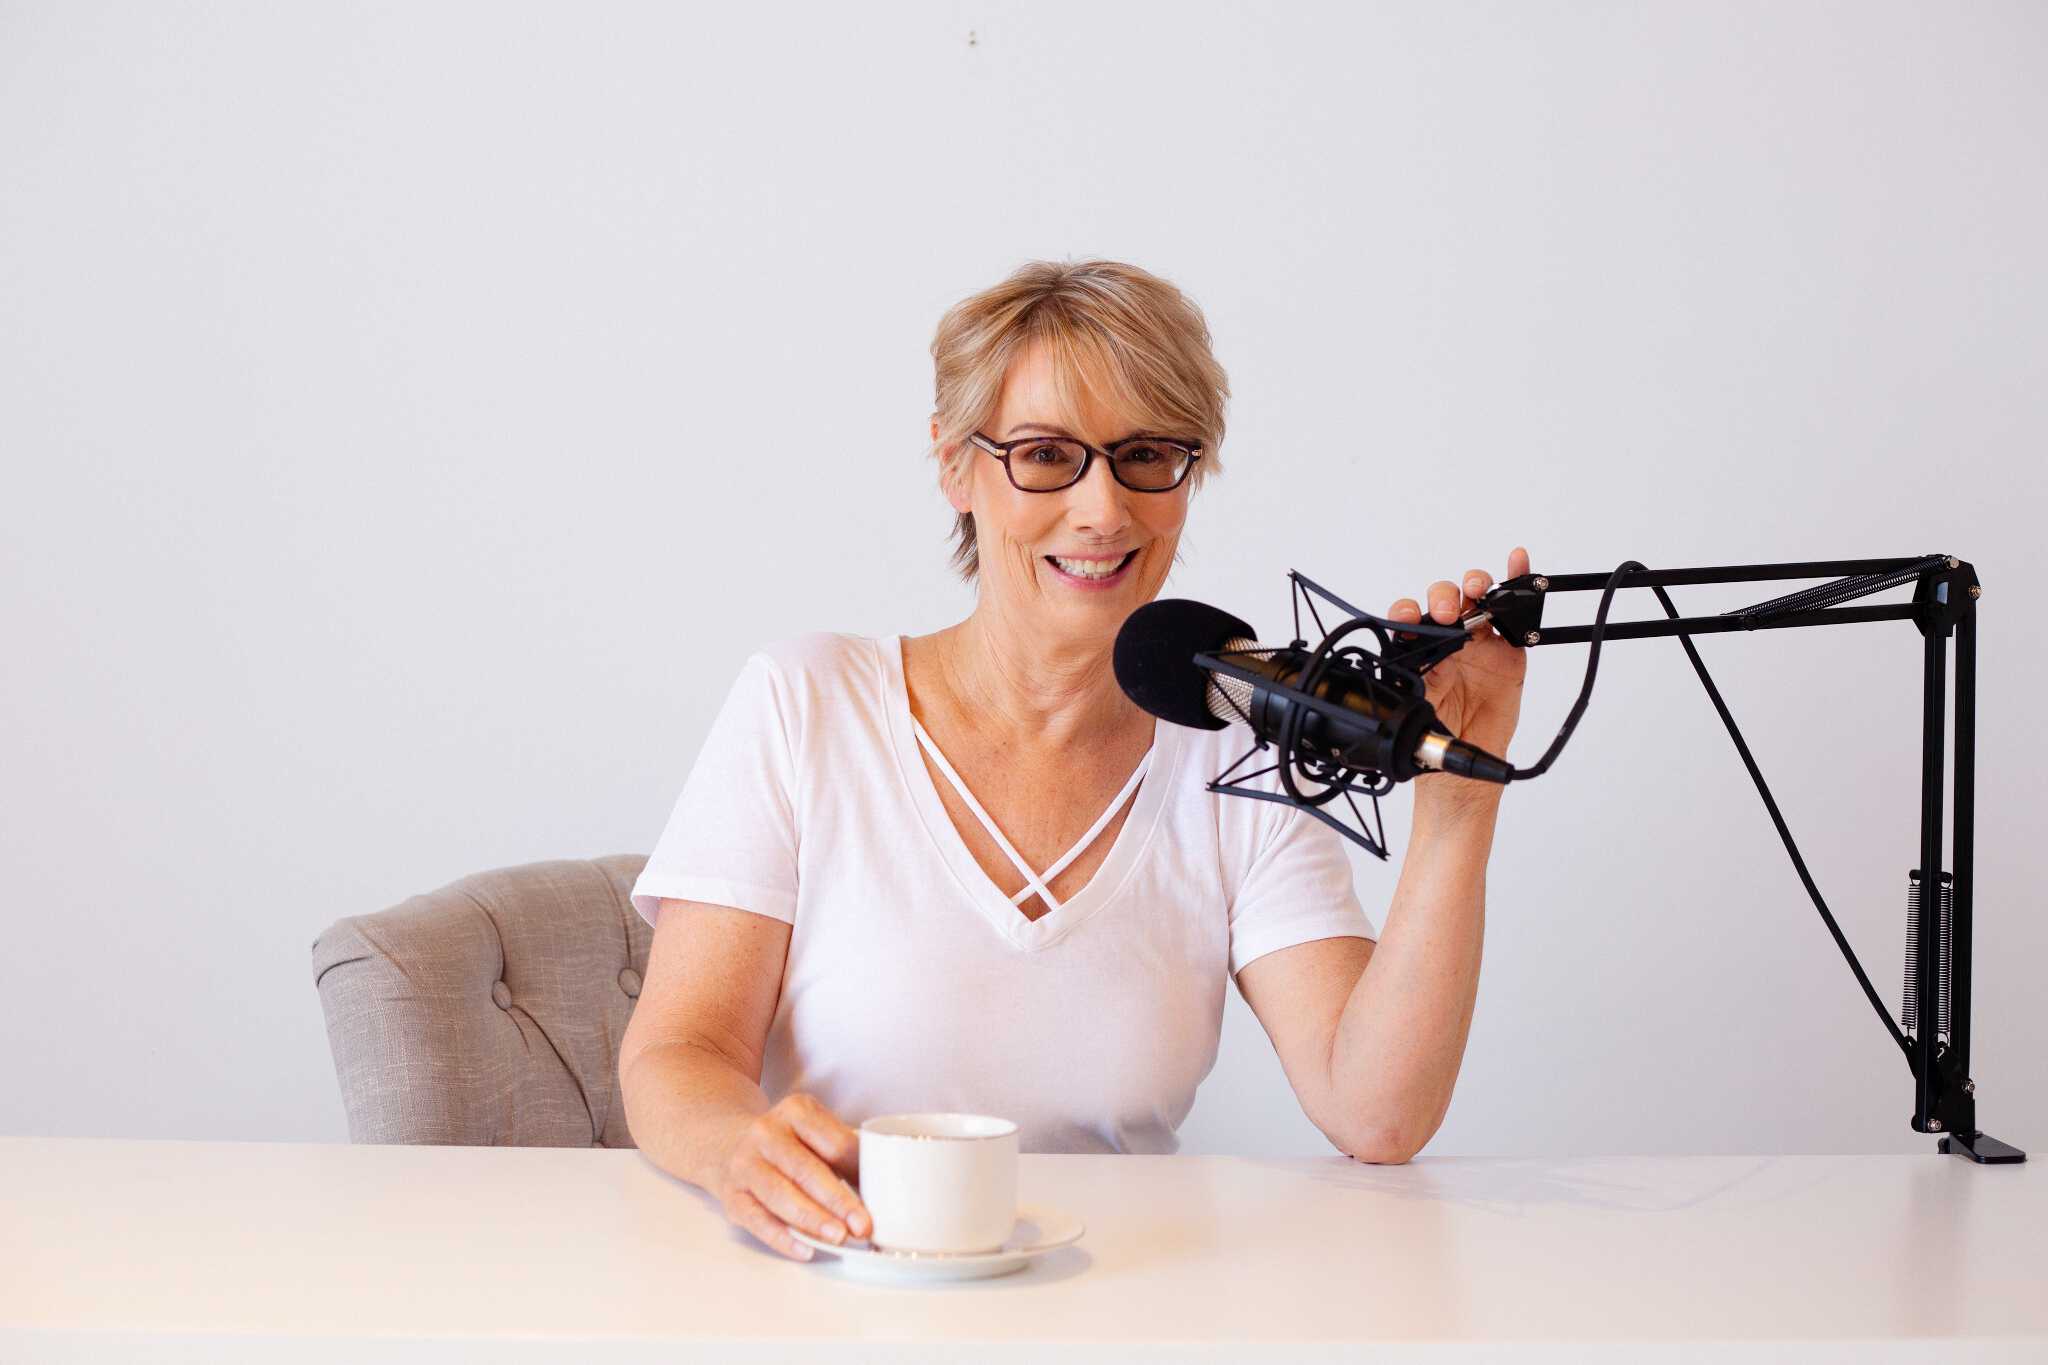 Kelly Howard recording a podcast with purpose and passion while drinking a cup of coffee.